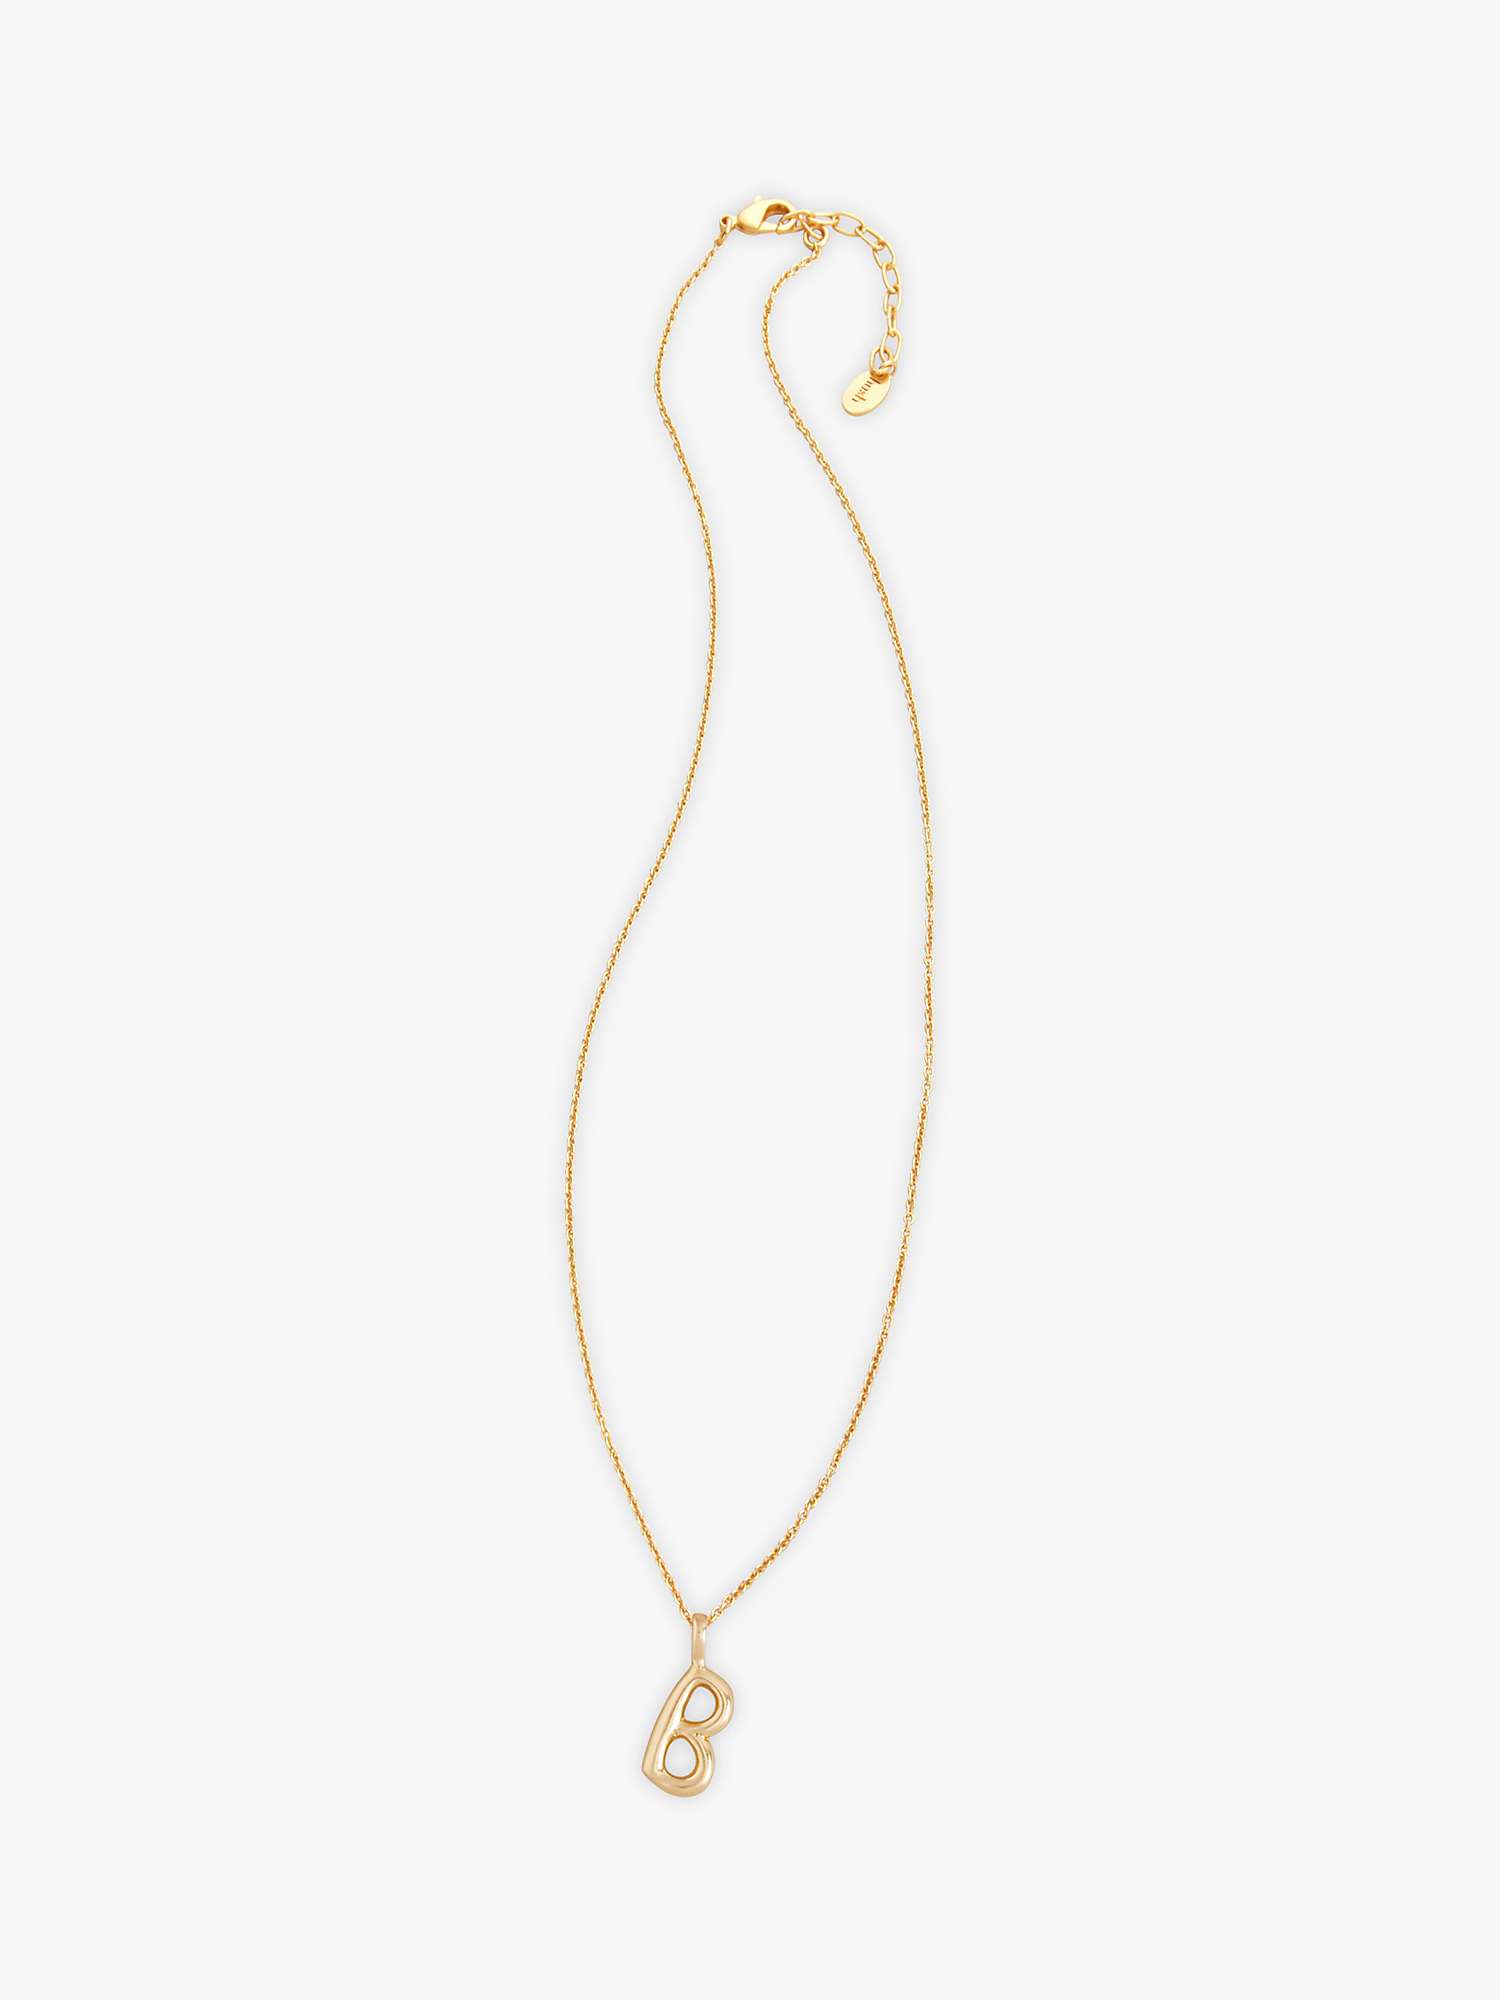 Buy HUSH Gaia Initial Pendant Necklace, Gold Online at johnlewis.com